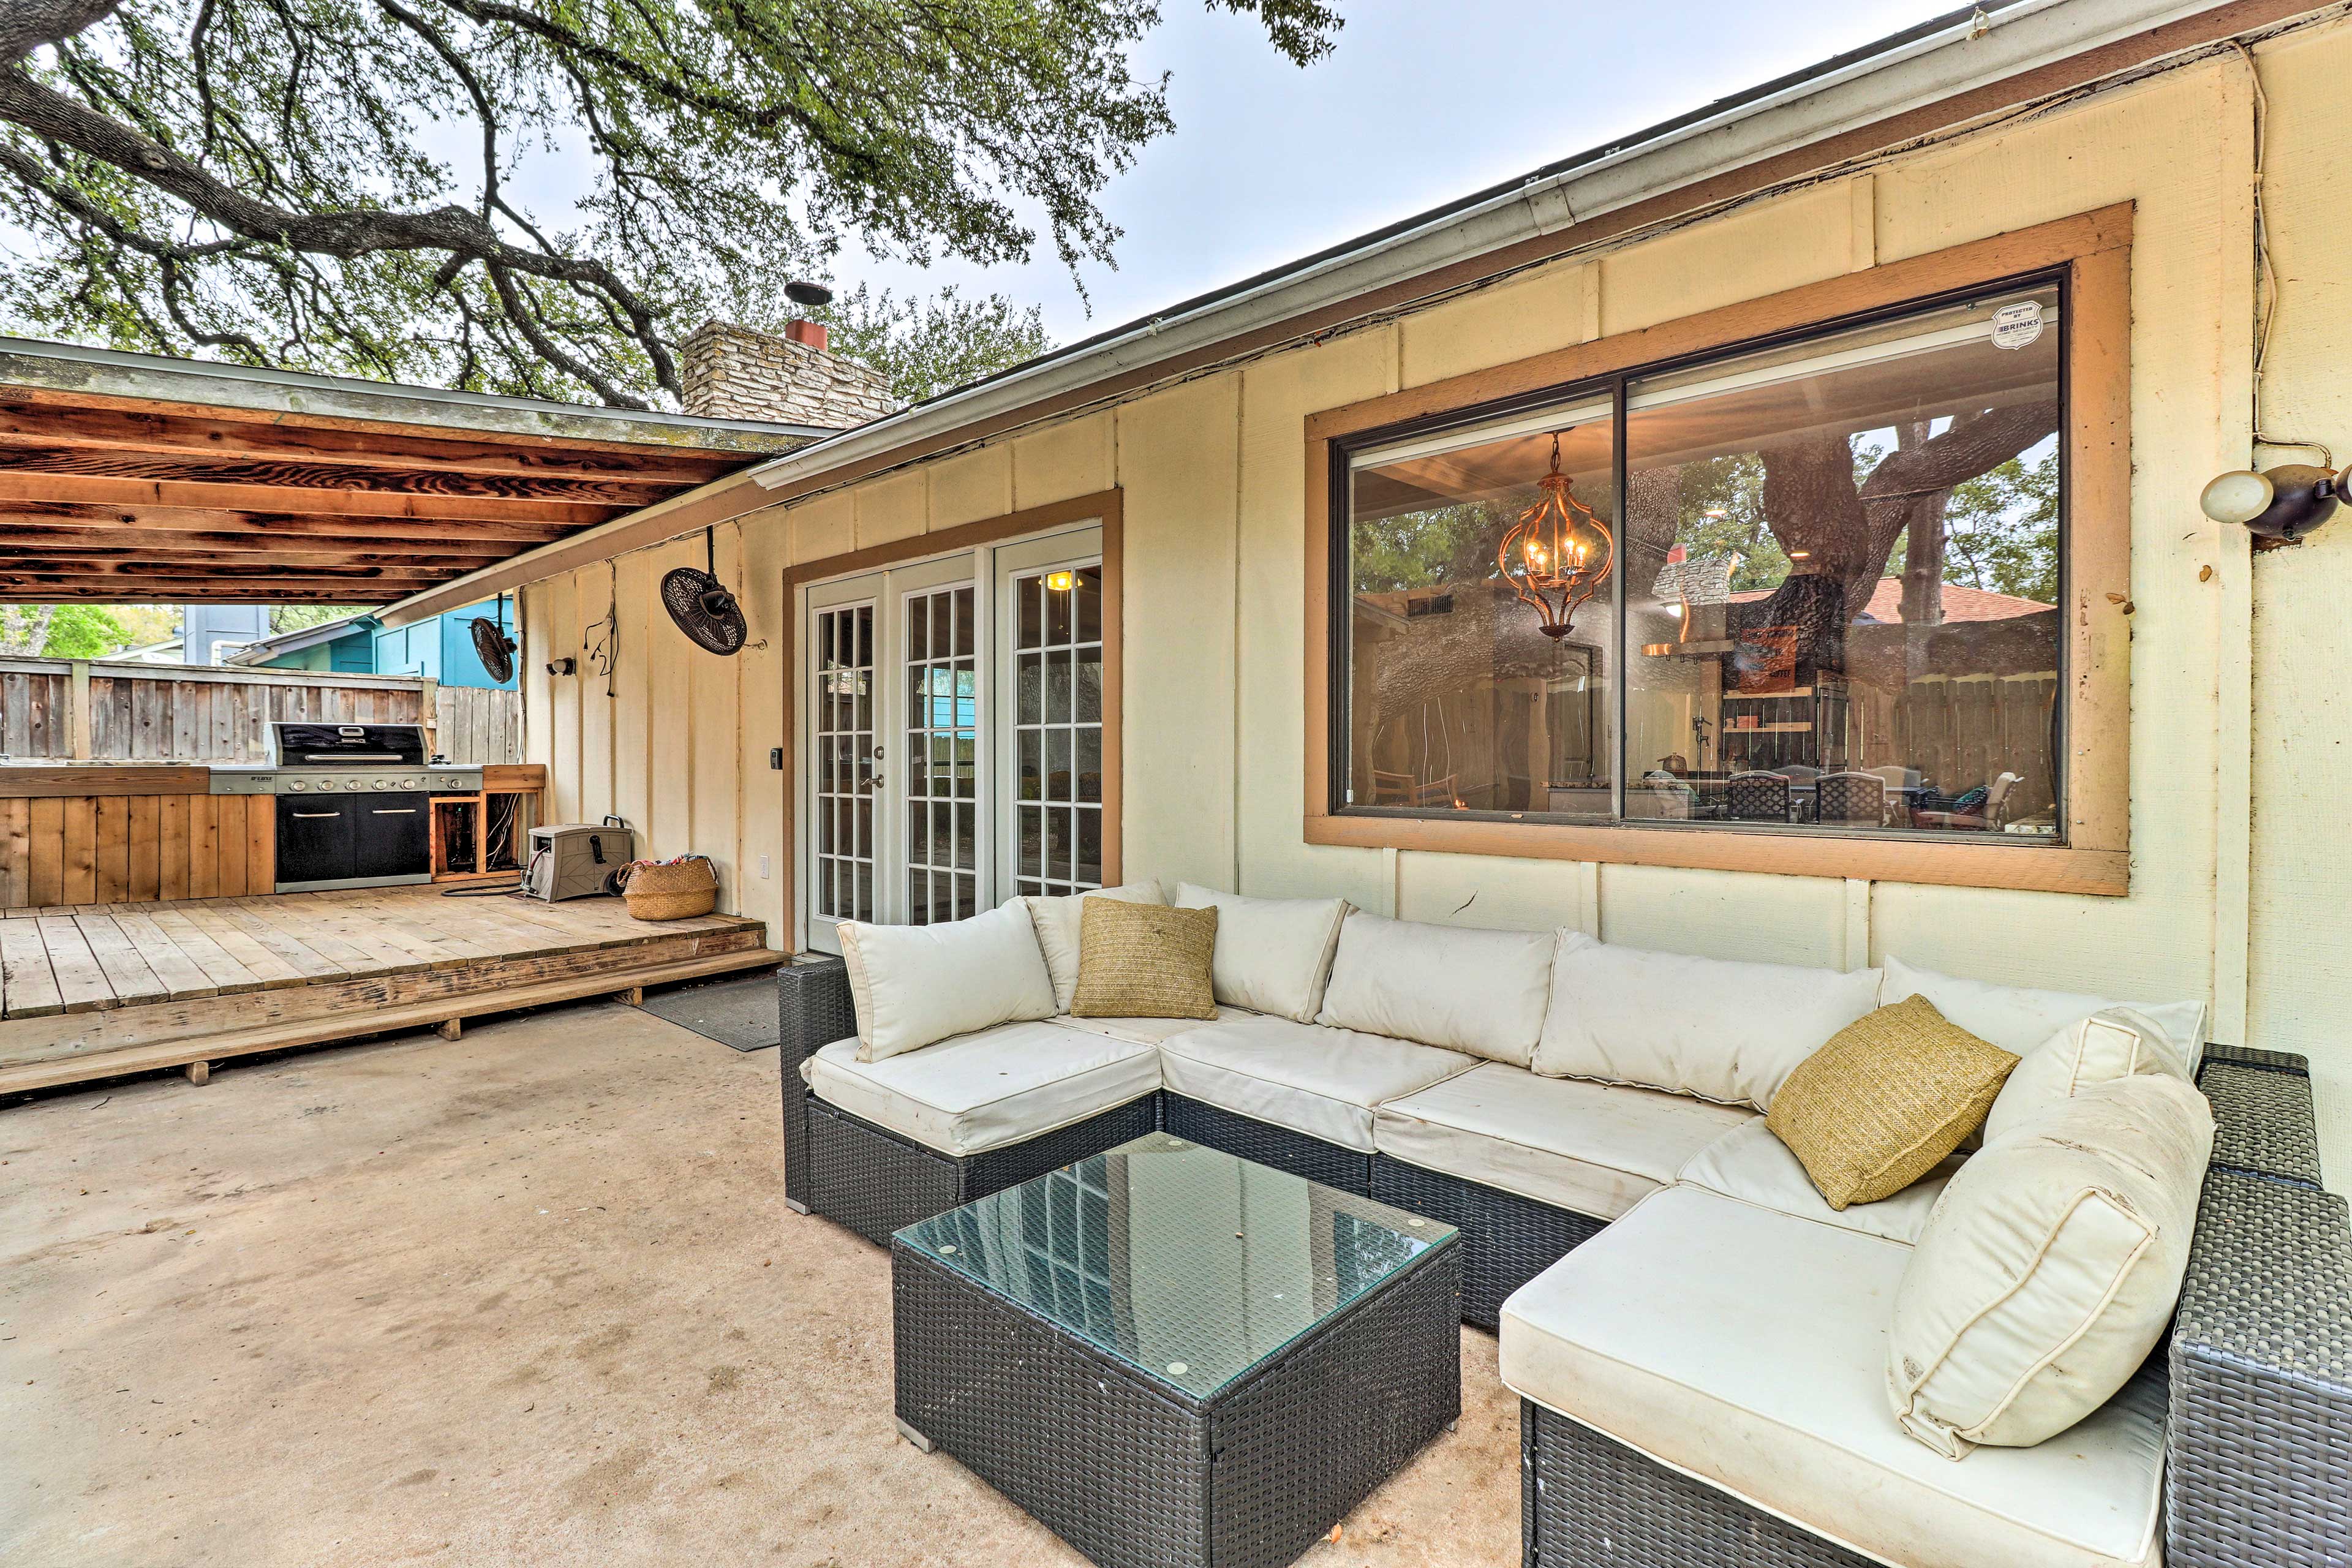 Patio | Outdoor Kitchen | Daybed Swing | Gas Grill | Sitting Area | Dining Area